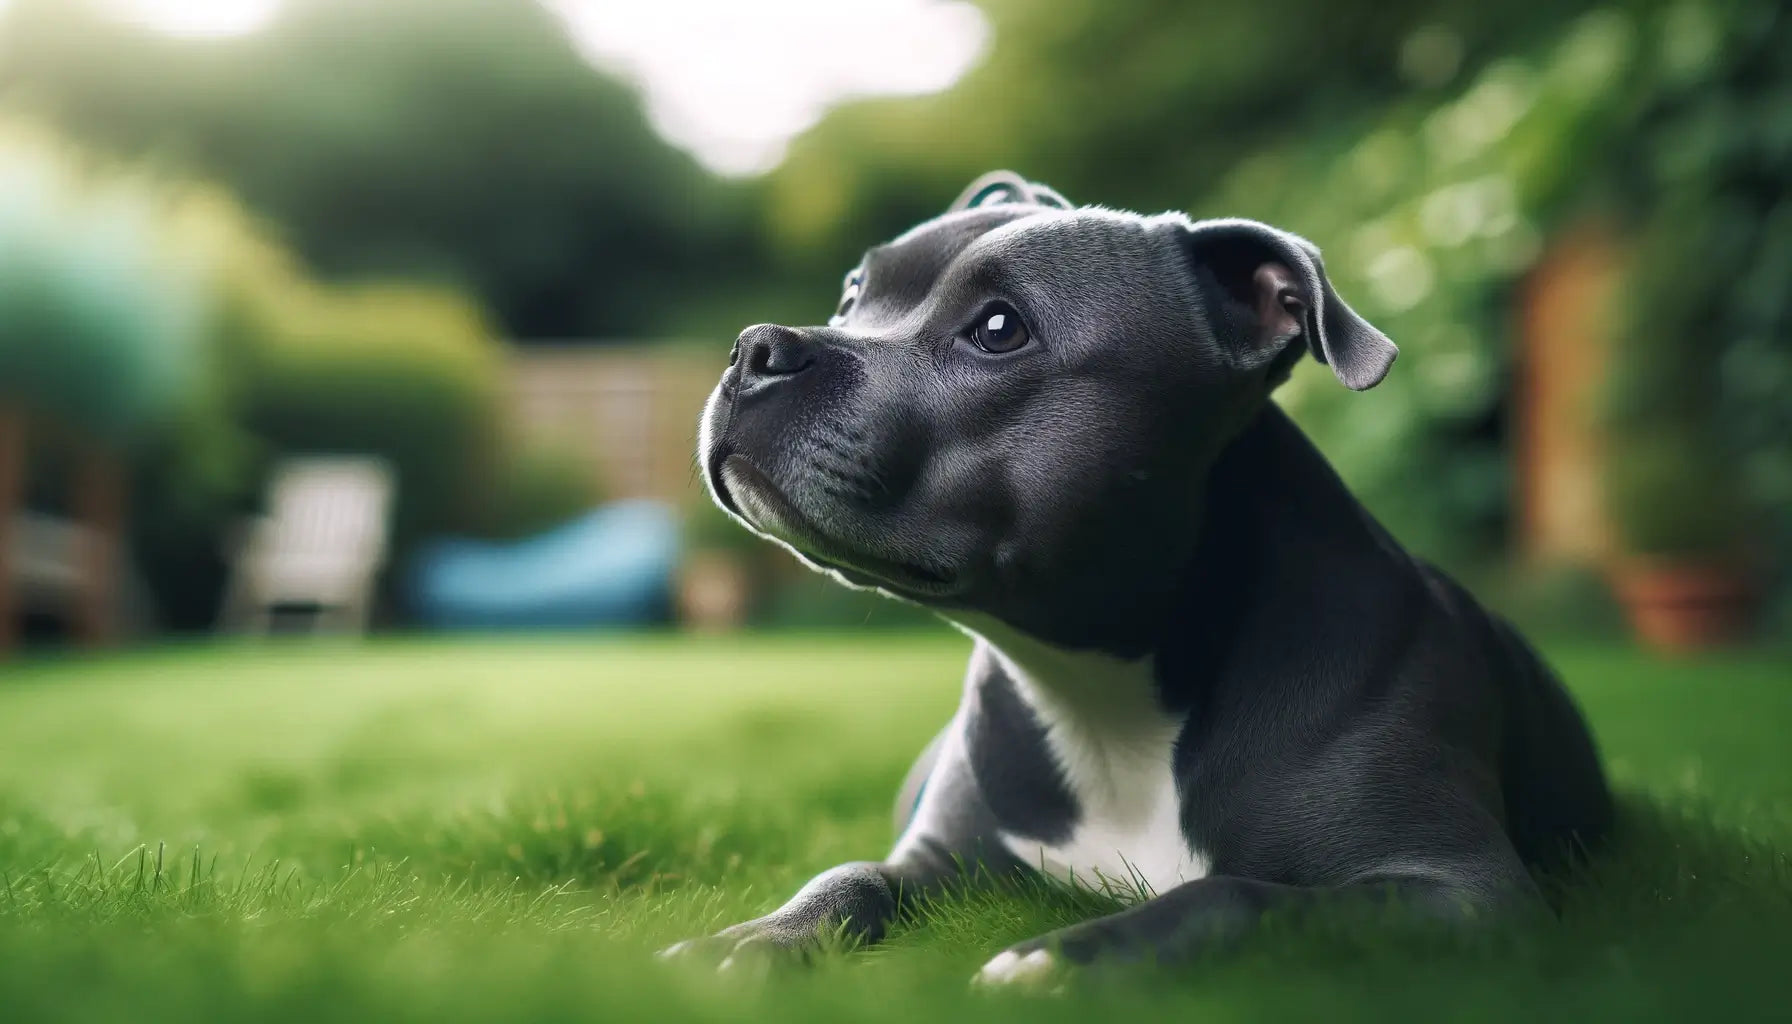 Blue Staffy lying on the grass with its head raised gazing off to the side in a pensive or attentive manner.